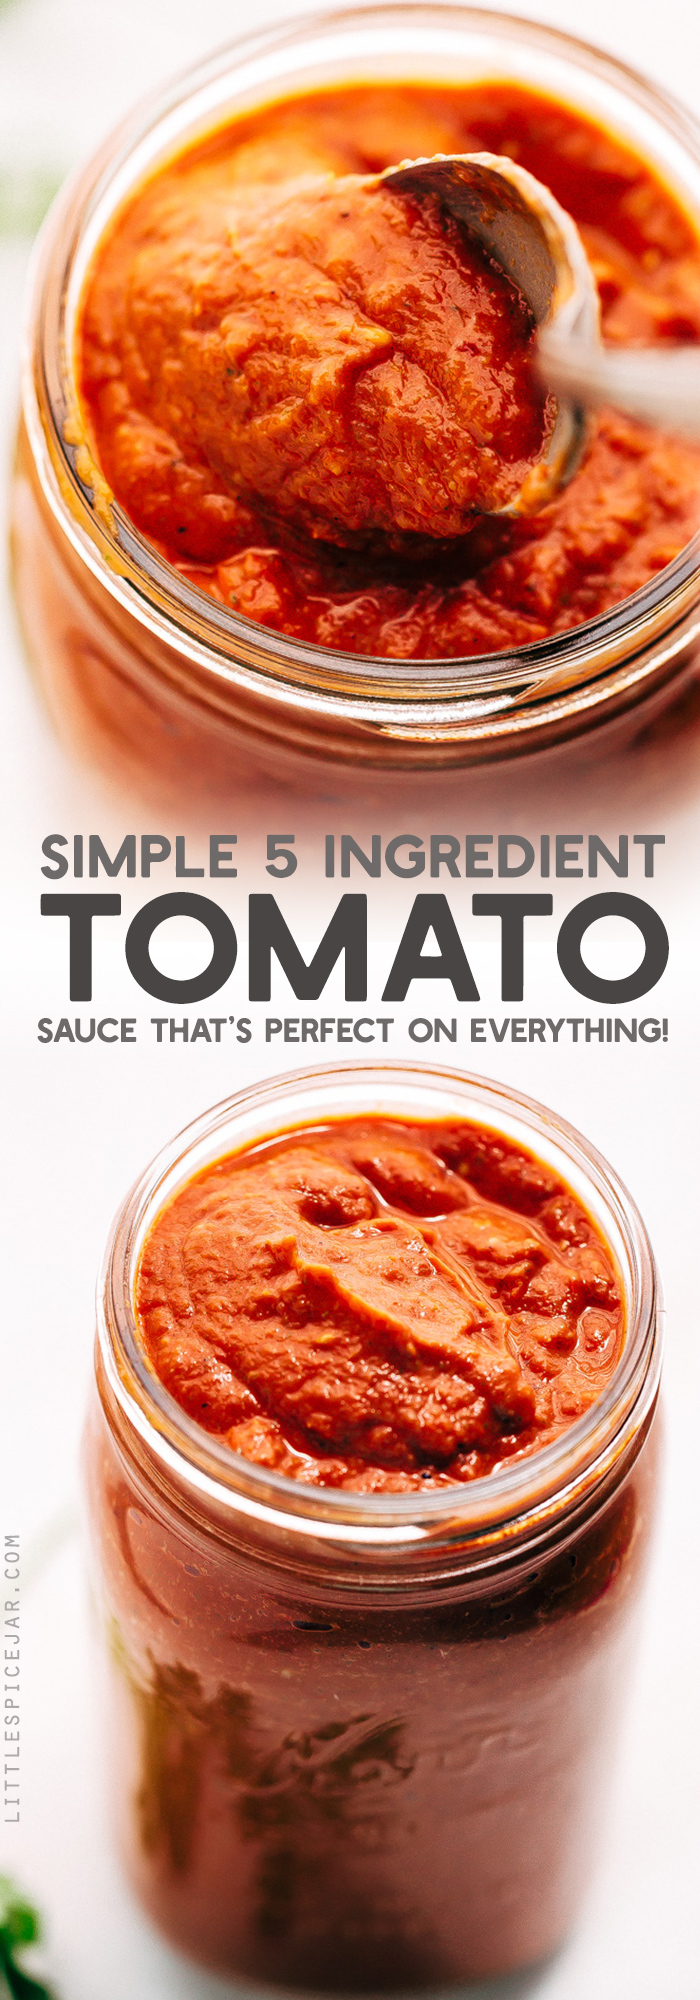 Simple 5 Ingredient Tomato Sauce - a rustic sauce that's easy to make. Just toss it all into the oven and sit back as it make your whole house smell wonderful! Perfect to use on pasta, lasagna, as a dip for sandwiches or meatballs! #tomatosauce #pizzasauce #homemaderedsauce #redsauce #tomatobasilsauce | Littlespicejar.com